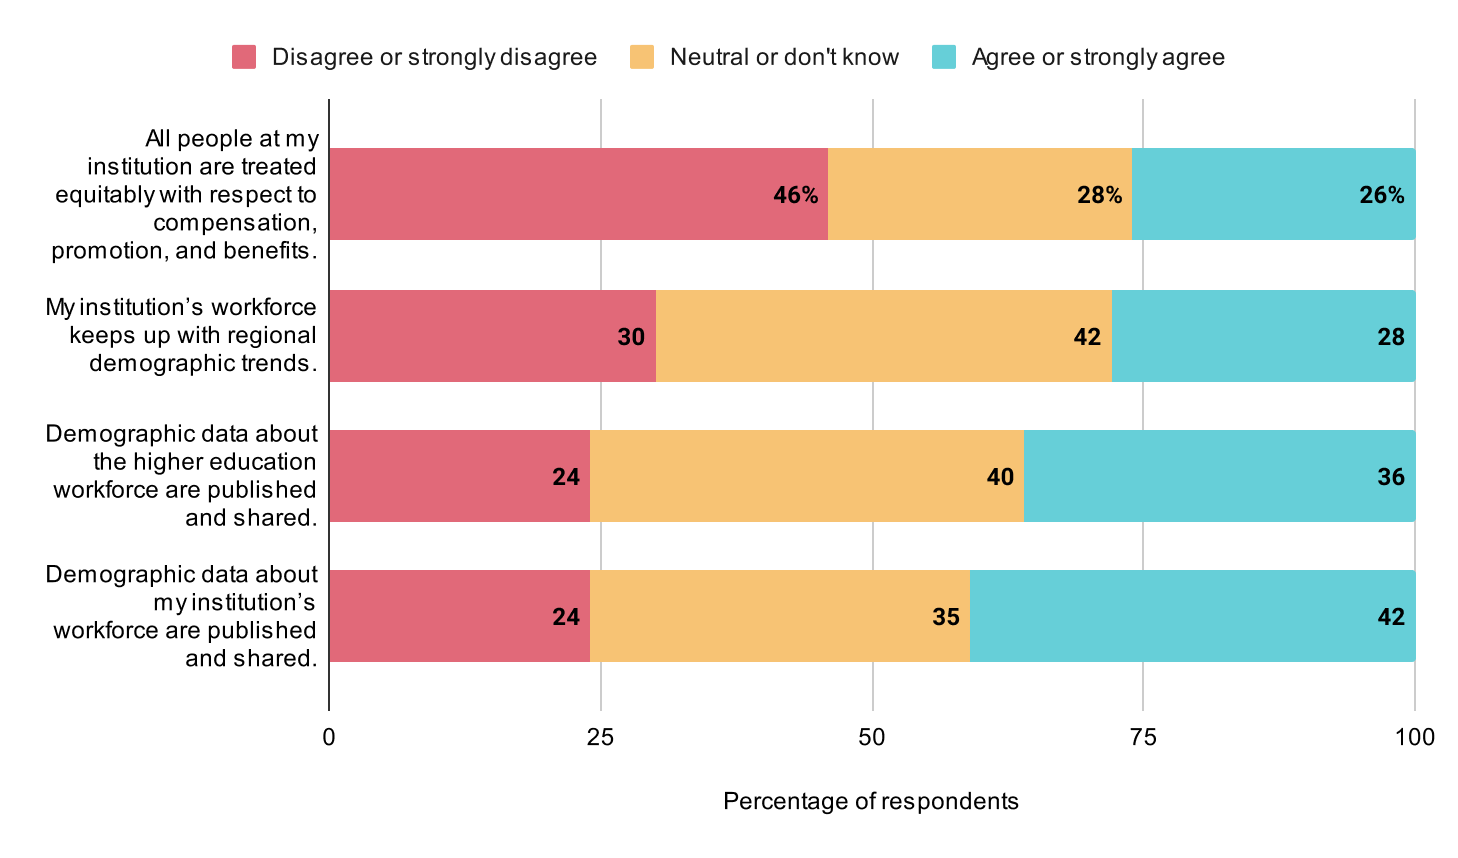 bar graph showing percentage of respondents agreement with statements about workforce demographics. People treated equitably at my institutions with respect to compensation, promotion, and benefits: 46% Disagree or strongly disagree, 28% neutral or don't know, 26% Agree or strongly agree. My institution's workforce keeps up with regional demographic trends: 30% Disagree or strongly disagree, 42% neutral or don't know, 28% Agree or strongly agree.Demographic data about the higher education workforce are published and shared: 24% Disagree or strongly disagree, 40% neutral or don't know, 36% Agree or strongly agree. Demographic data about my institution's workforce are published and shared: 24% Disagree or strongly disagree, 35% neutral or don't know, 42% Agree or strongly agree.